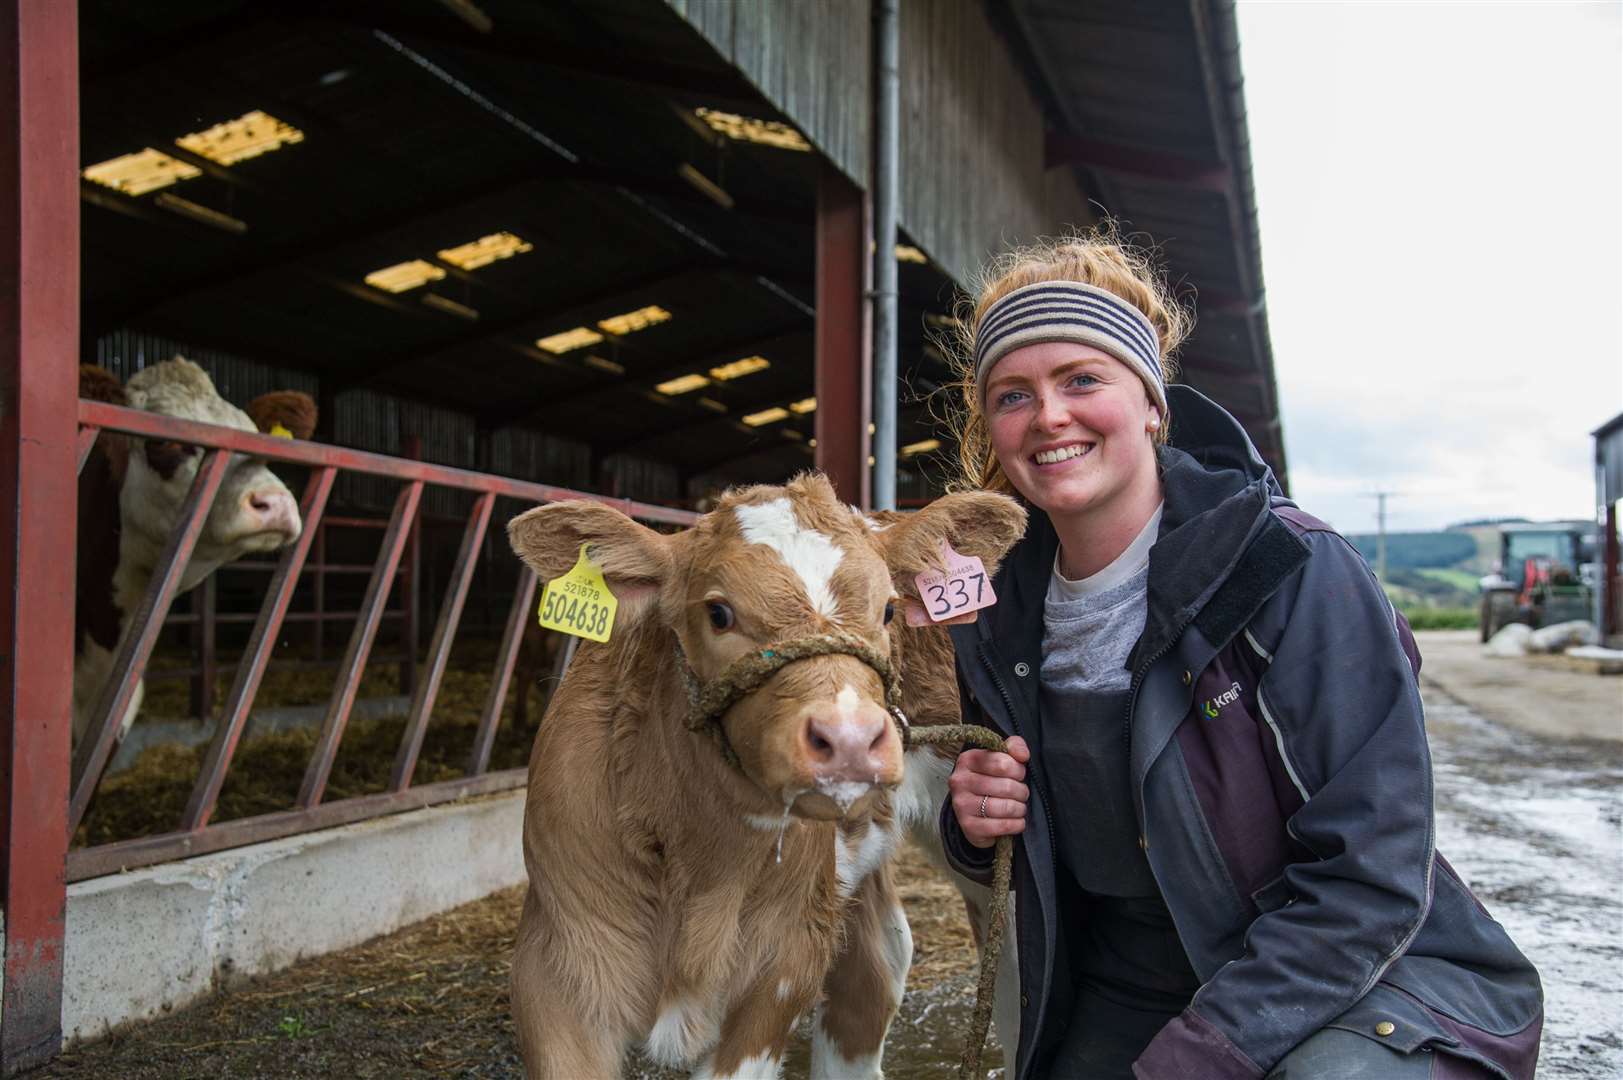 Nicola Wordie who has been nominated for Countryfile Young Countryside Champion with one of the calves from the 240 herd of cows. Picture: Becky Saunderson.